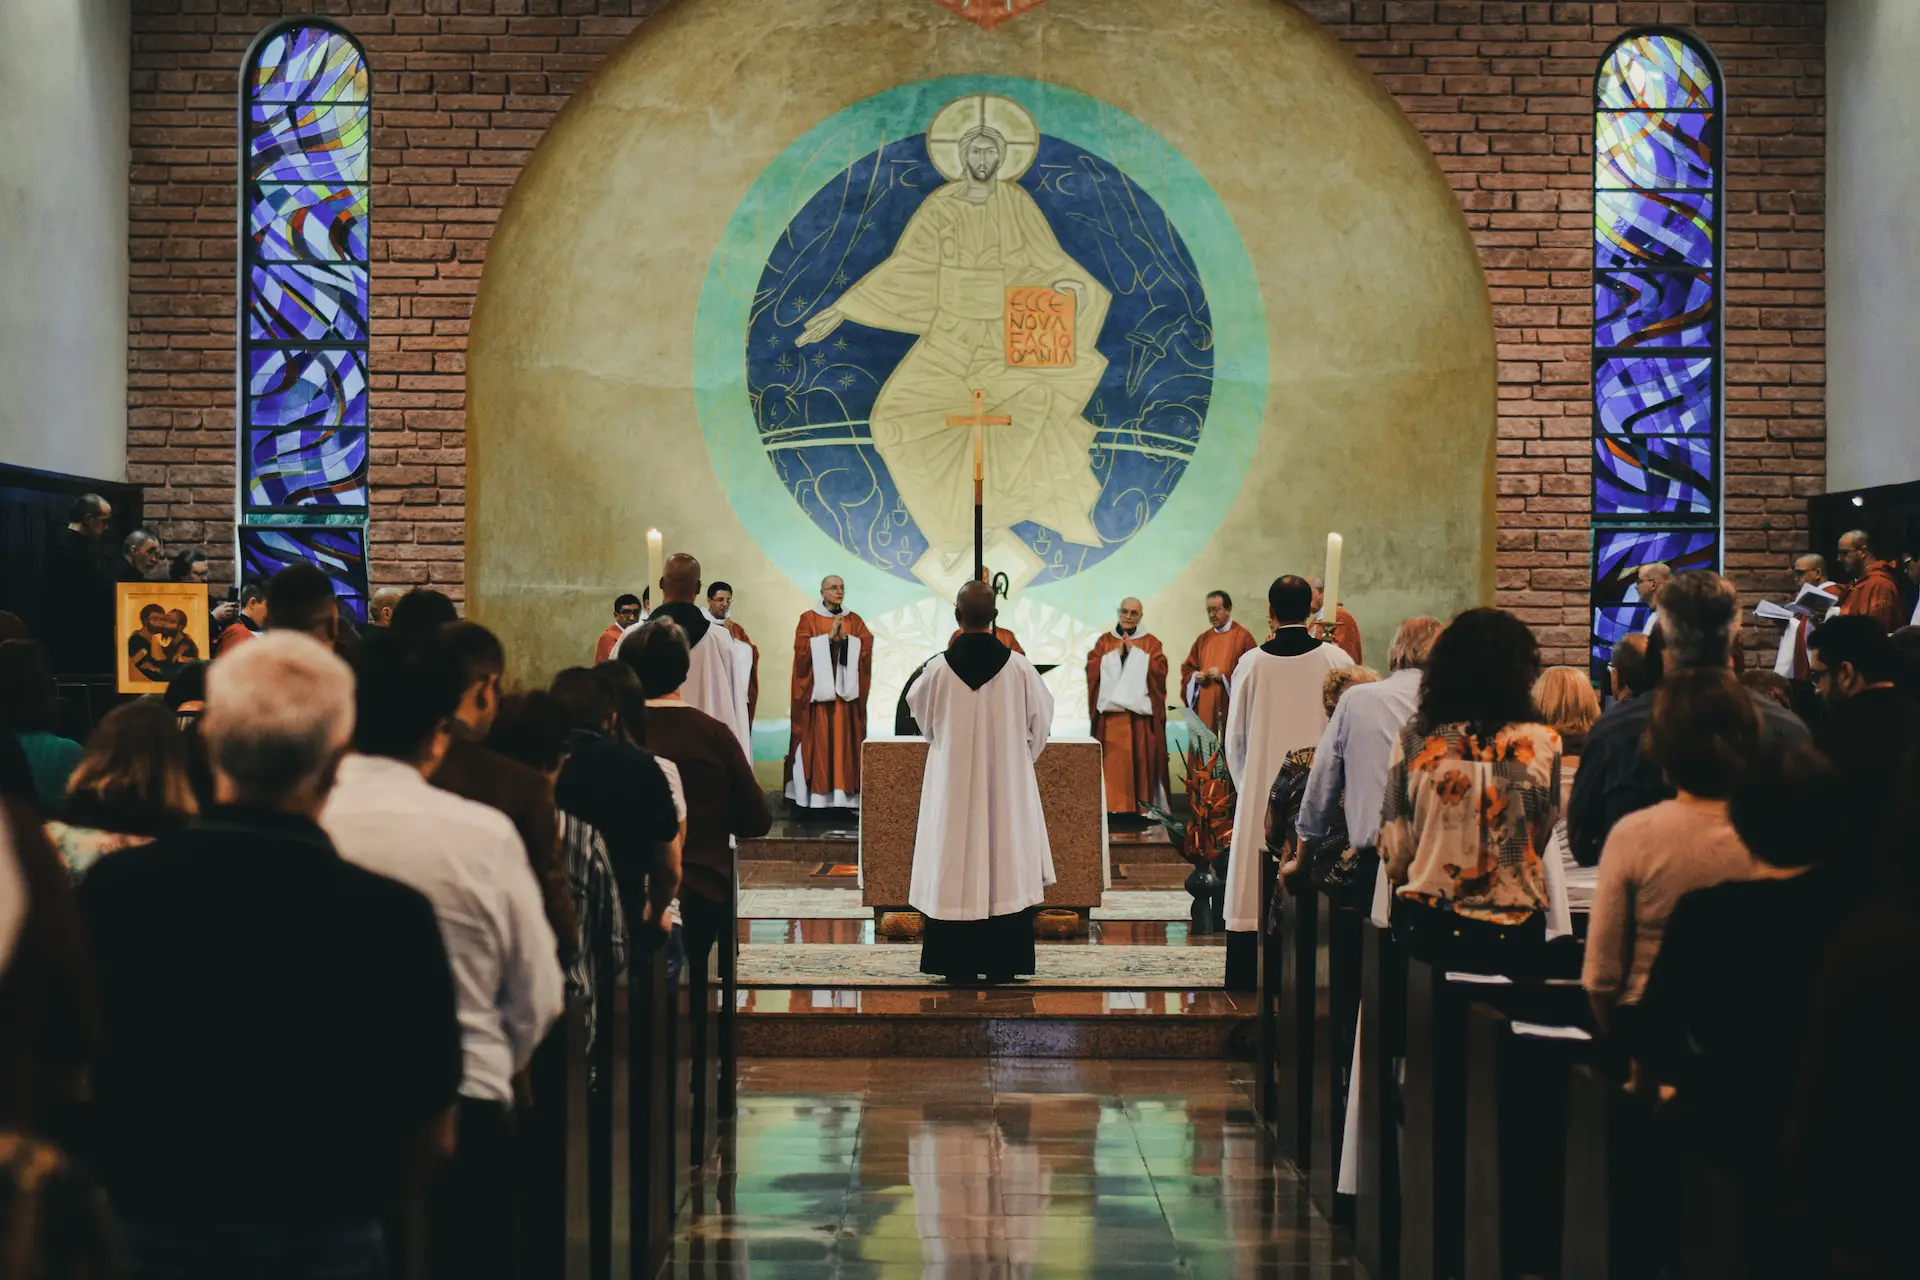 Attending Catholic Mass On Sunday: Finding Meaning and Connection